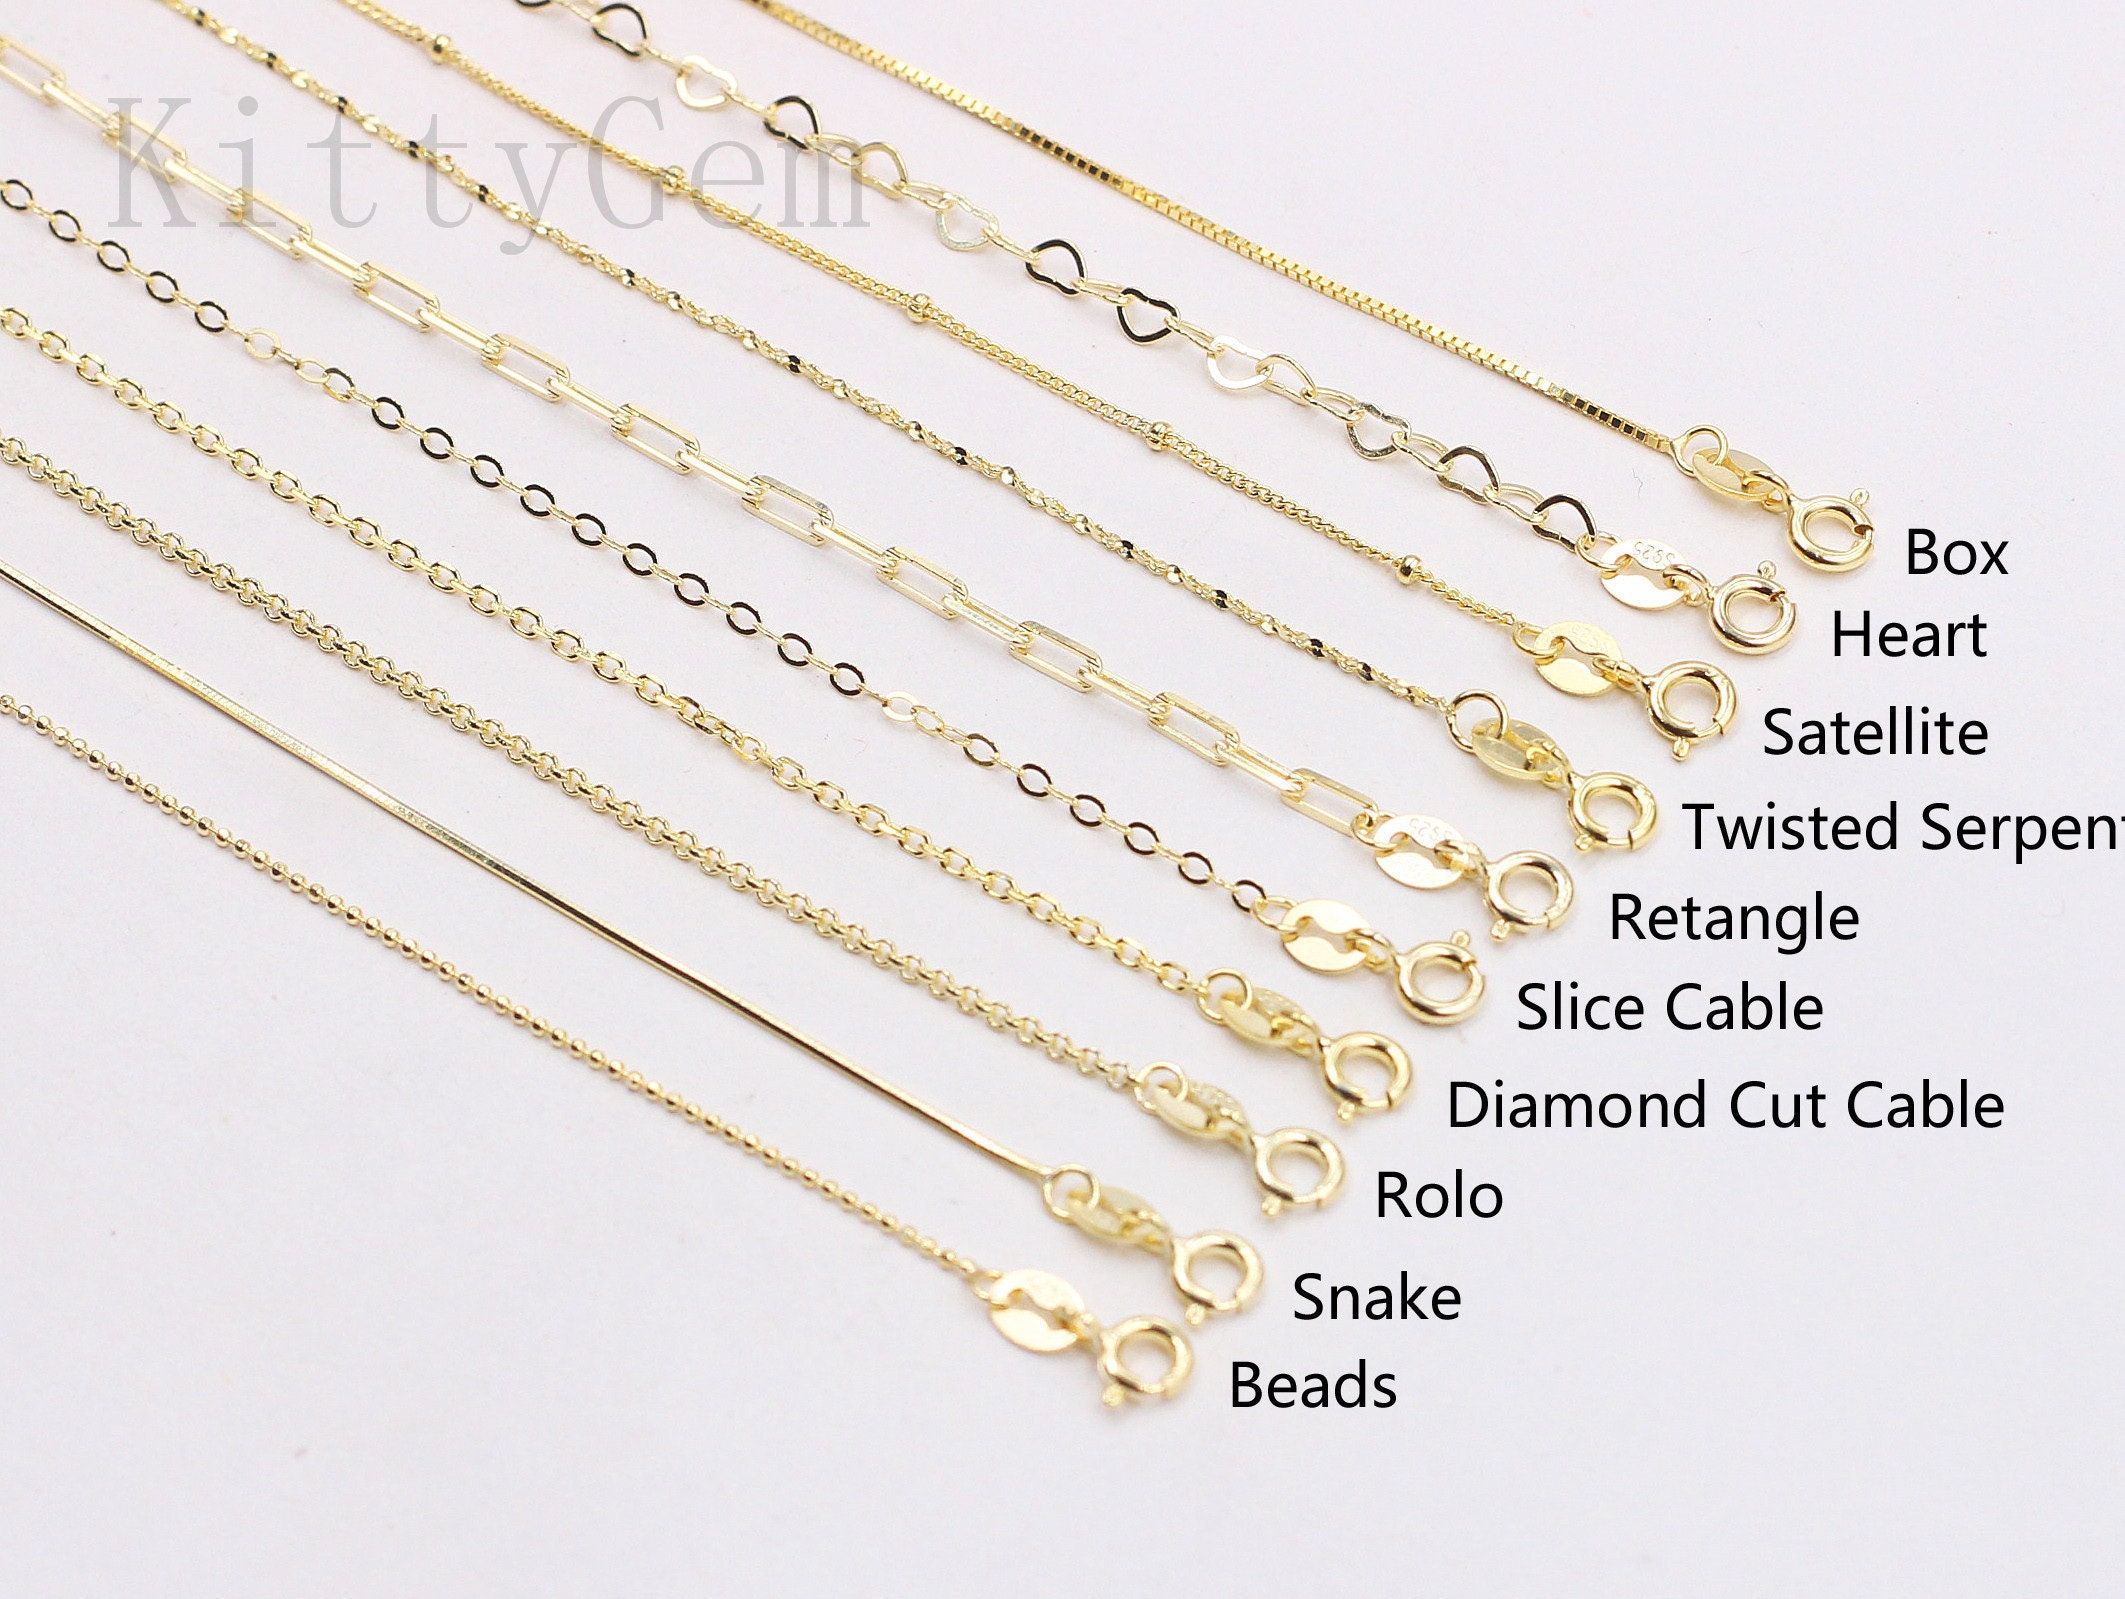 Gold Plated Necklace Chain, Vermeil Sterling Silver Necklace Chain-Bracelet,  Anklet - Vermeil Chain Bulk - Tiny Curb Chain-Long Necklace - 22-36 inches.